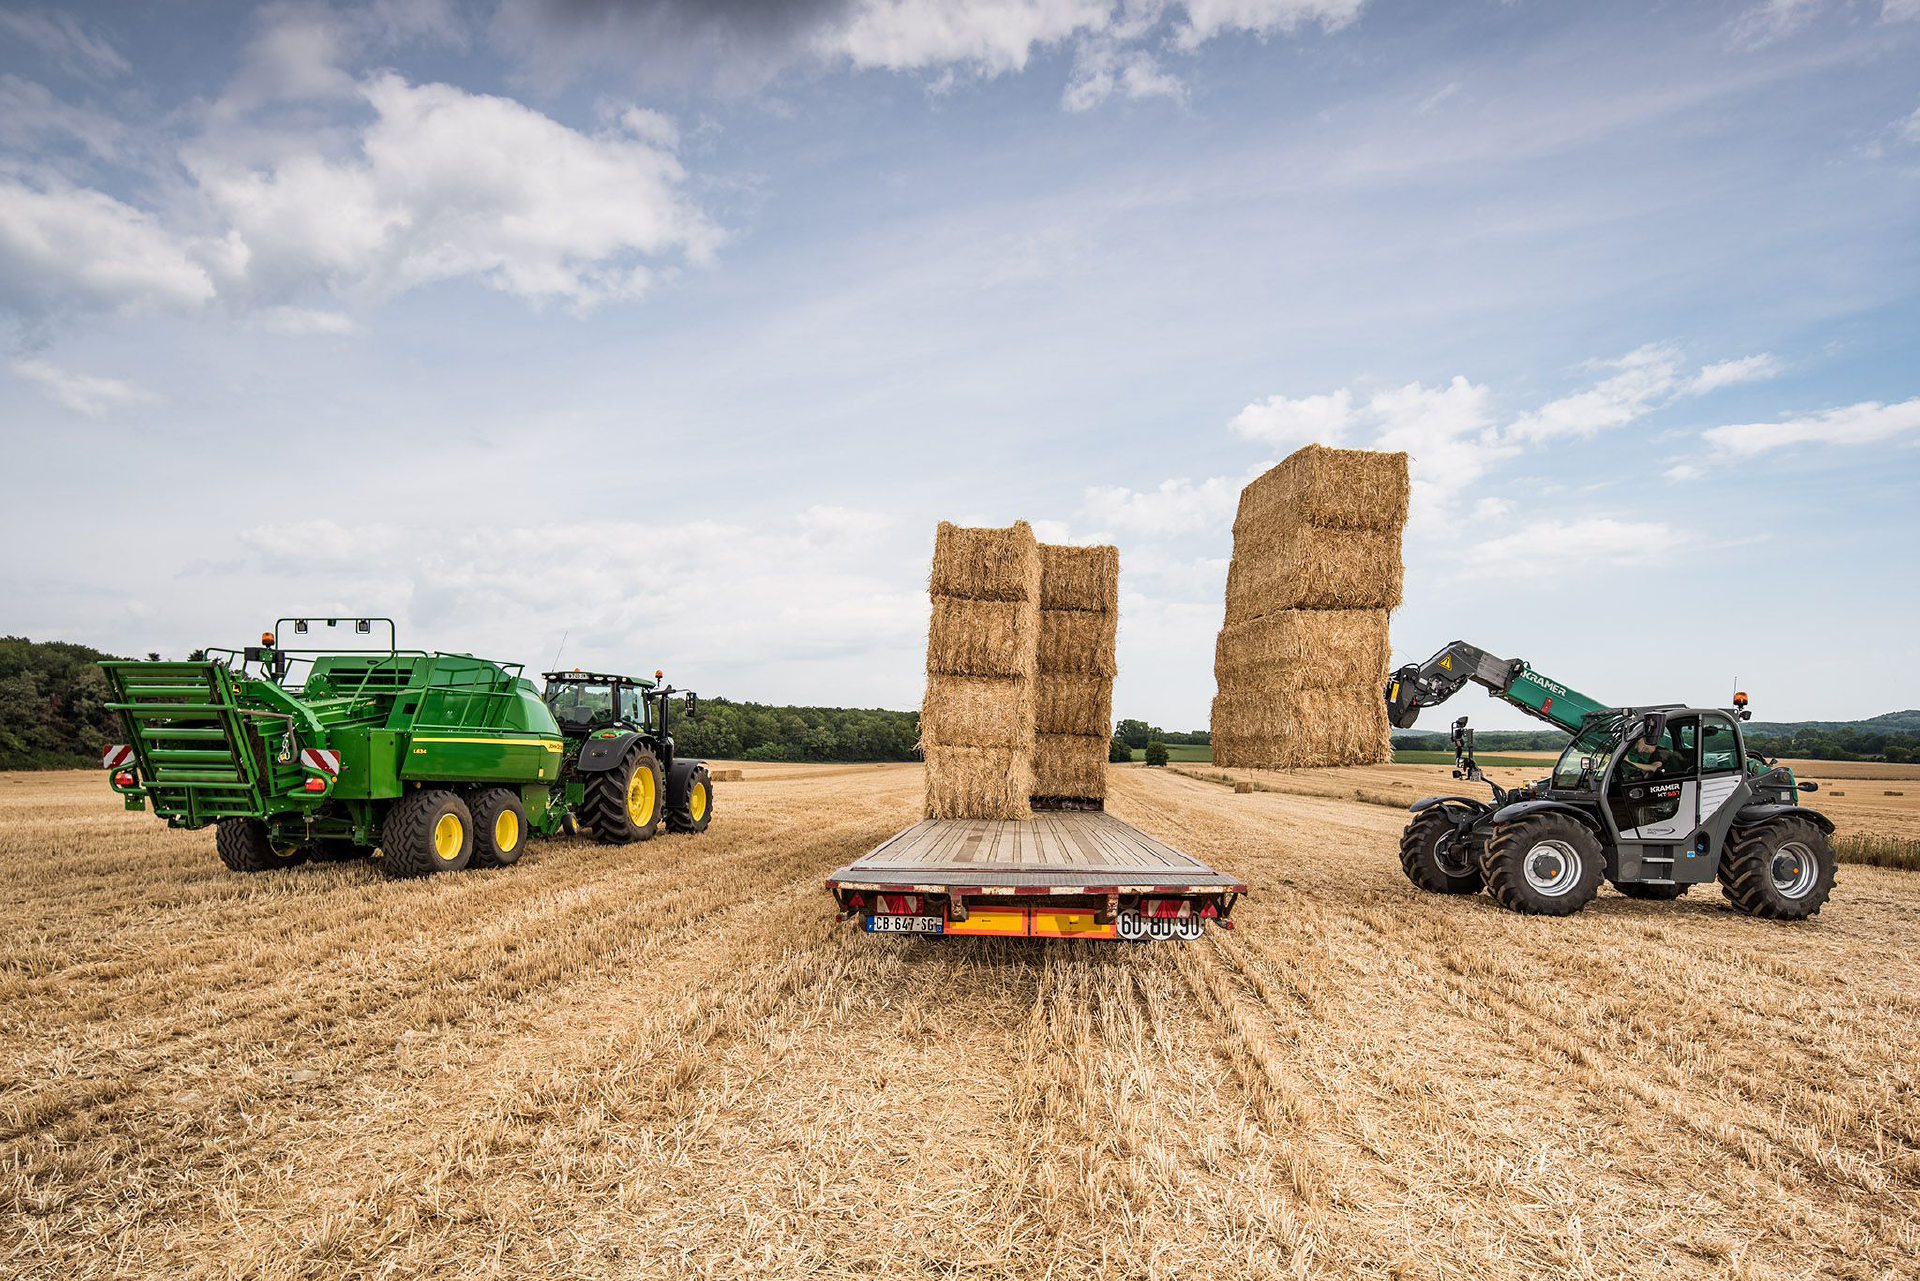 The Kramer telehandler KT557 while working with straw.